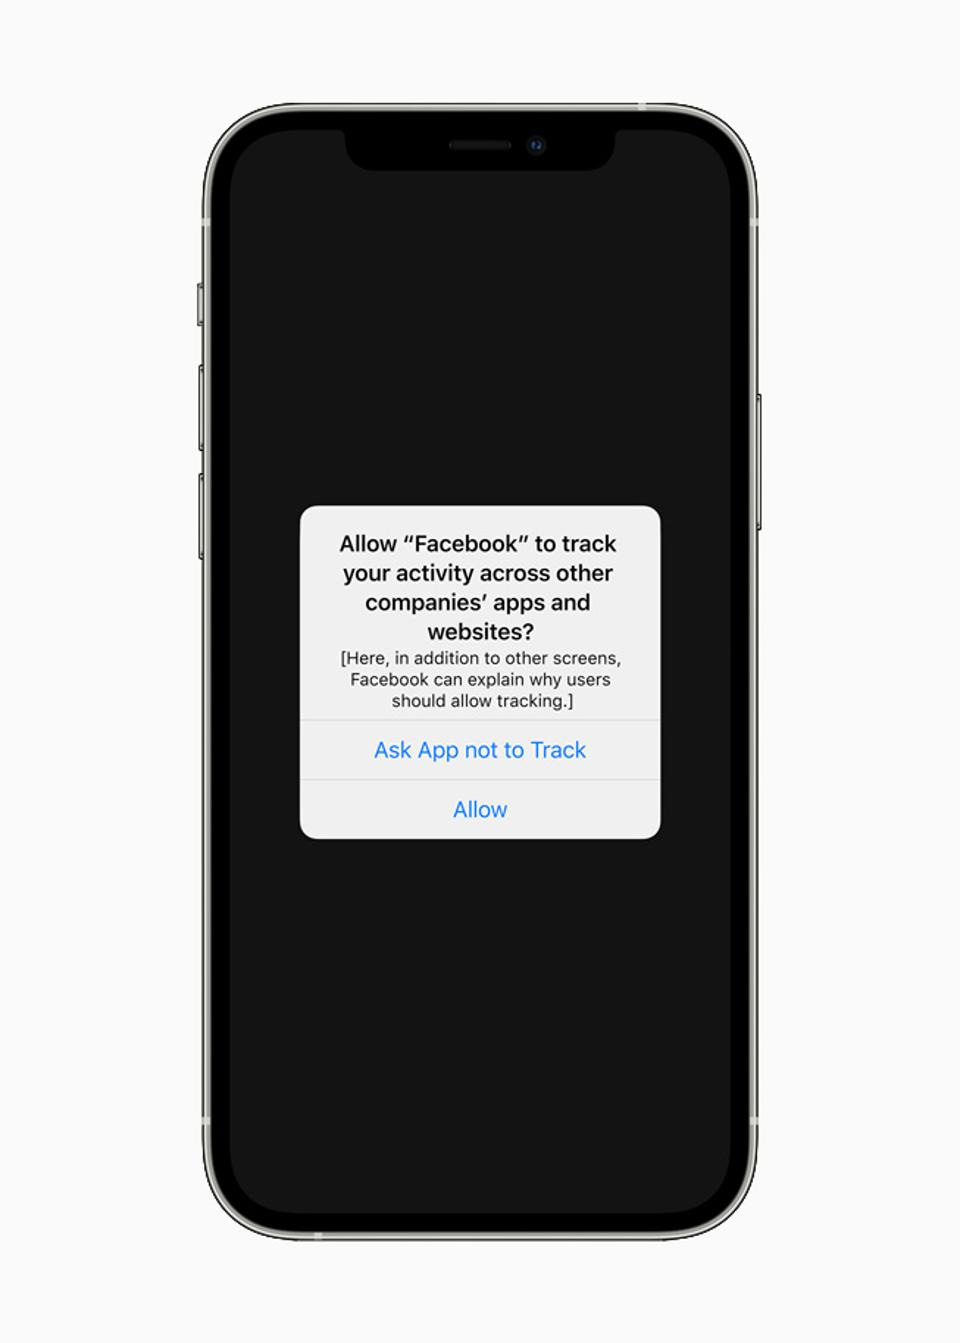 The new App Tracking Transparency screen Apple is featuring in its latest privacy announcement post.